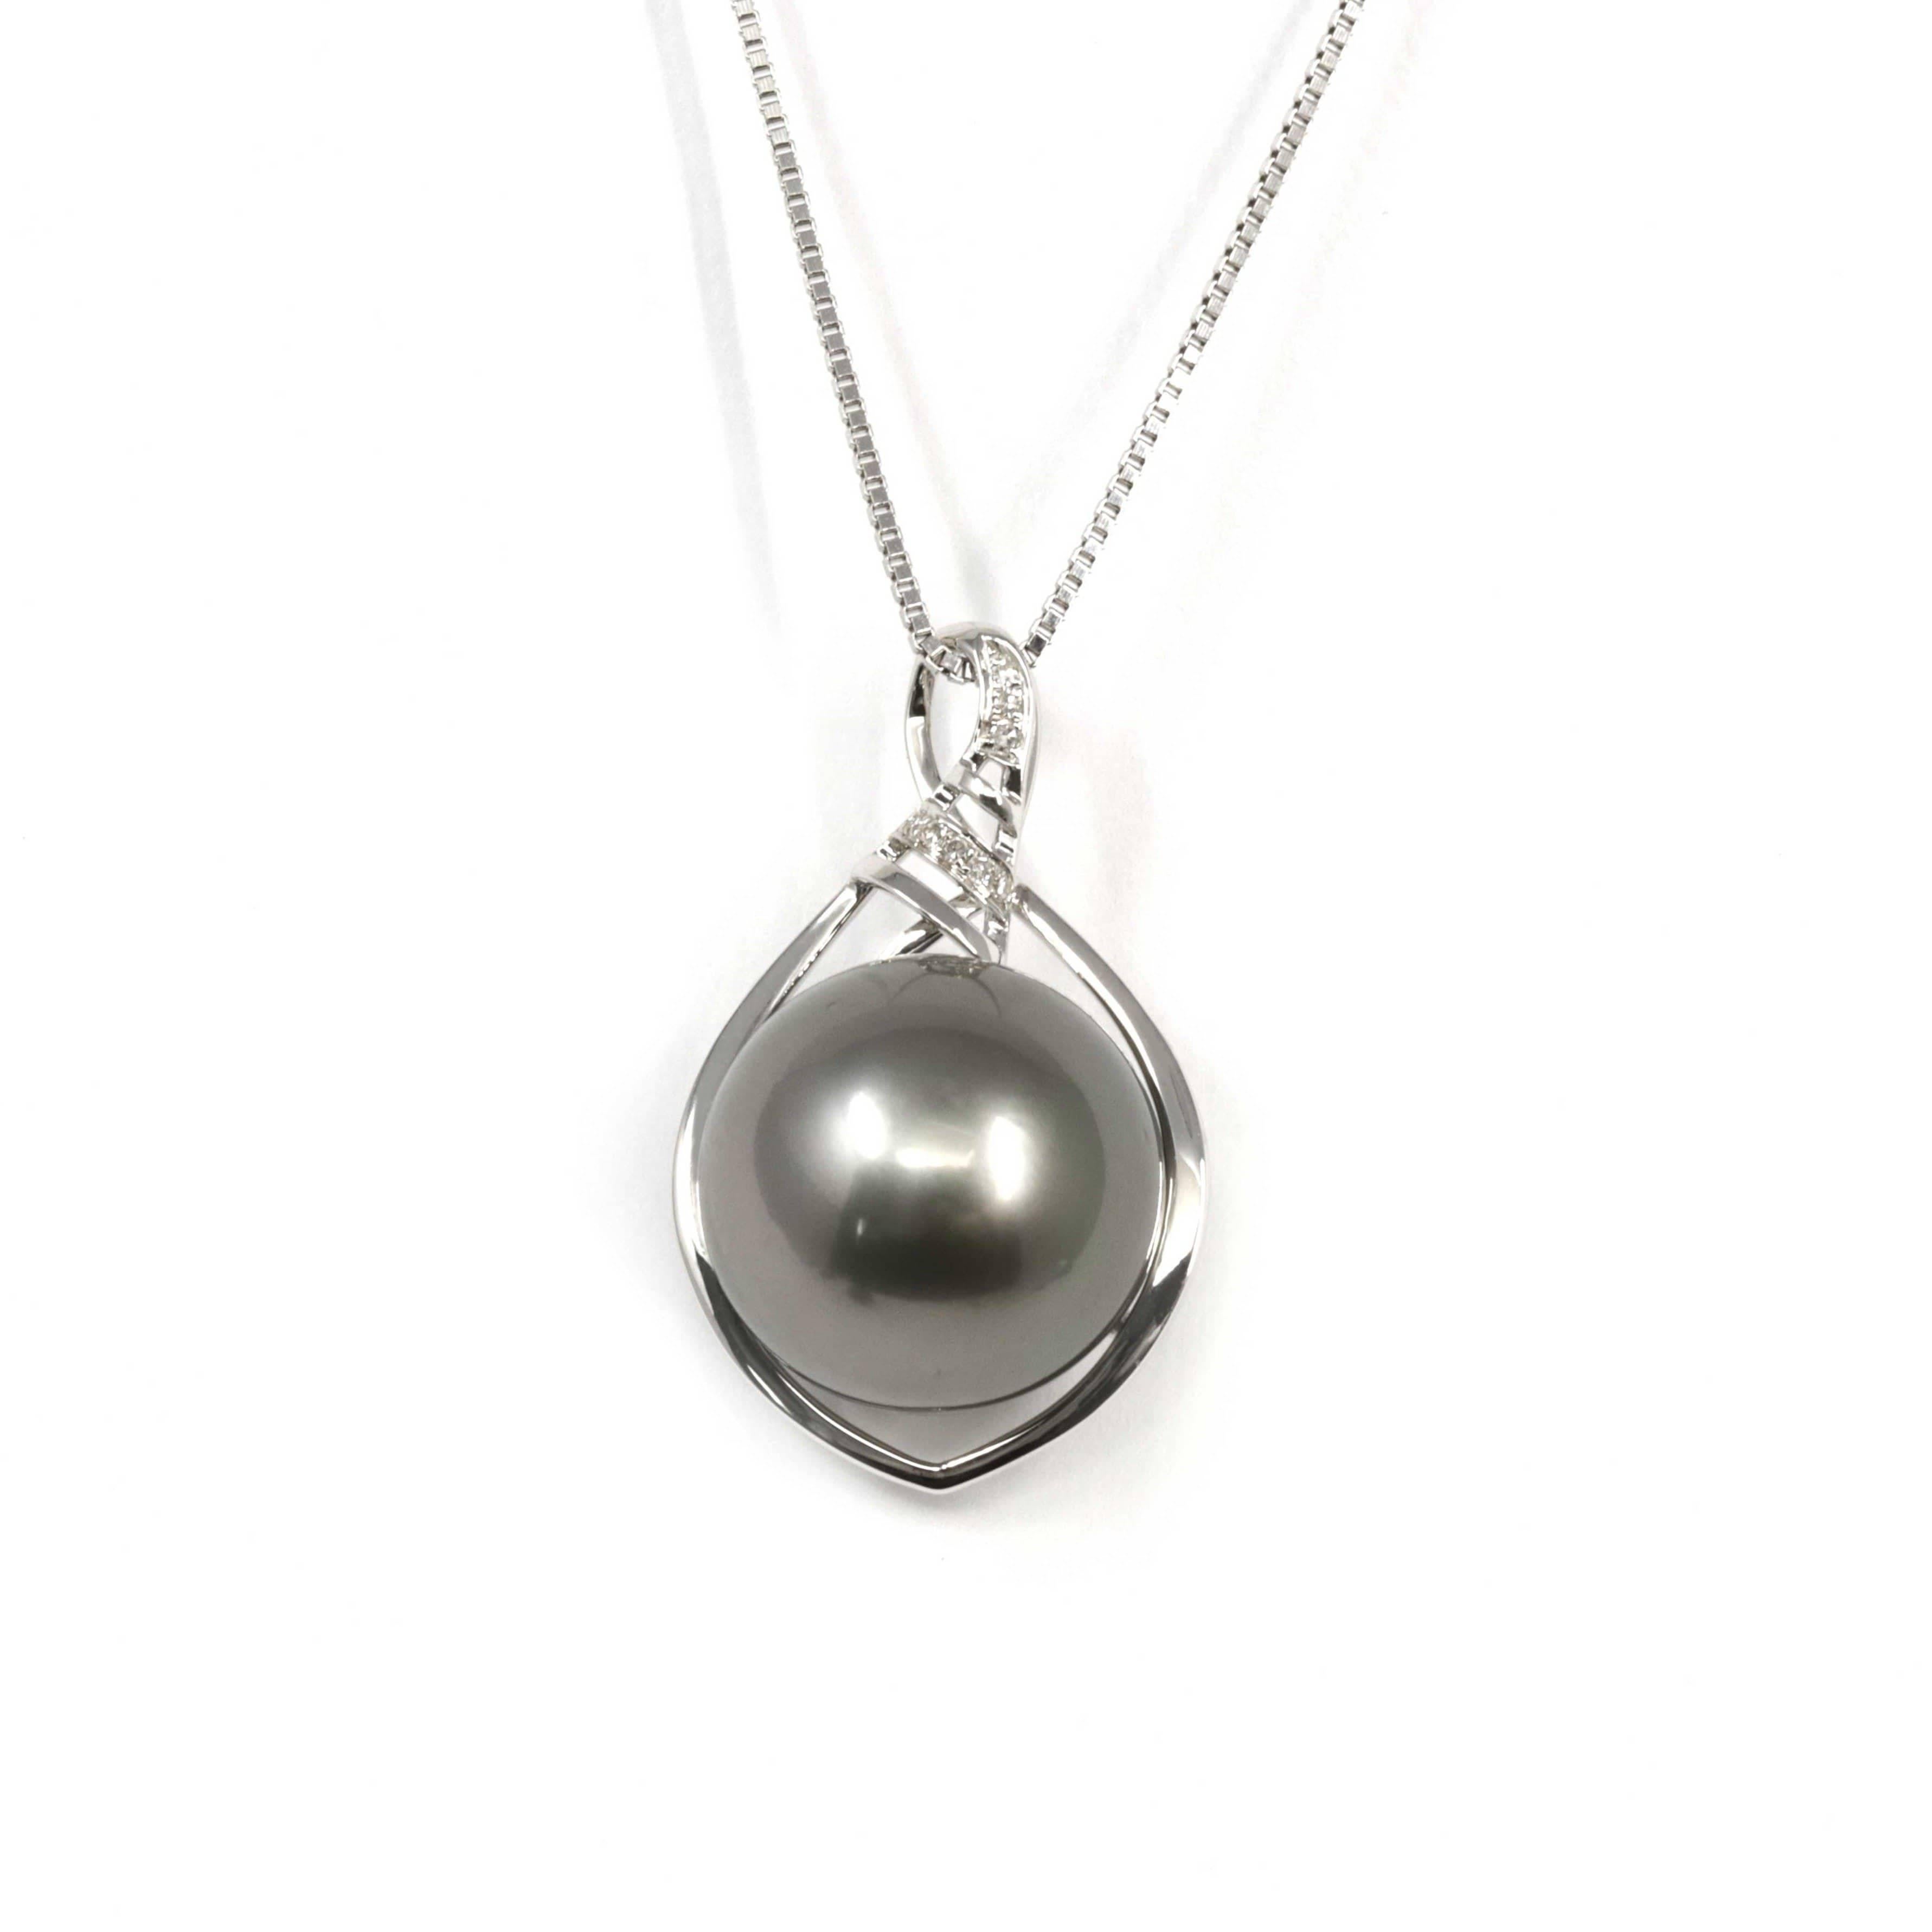 * INTRODUCTION---  Lustrous 15.09 mm diameter round black Tahitian South Sea cultured pearl. Can be worn on any occasion, whether formal evening event or everyday casual. Handpicked, real pearls with thick and iridescent nacre. This pendant is